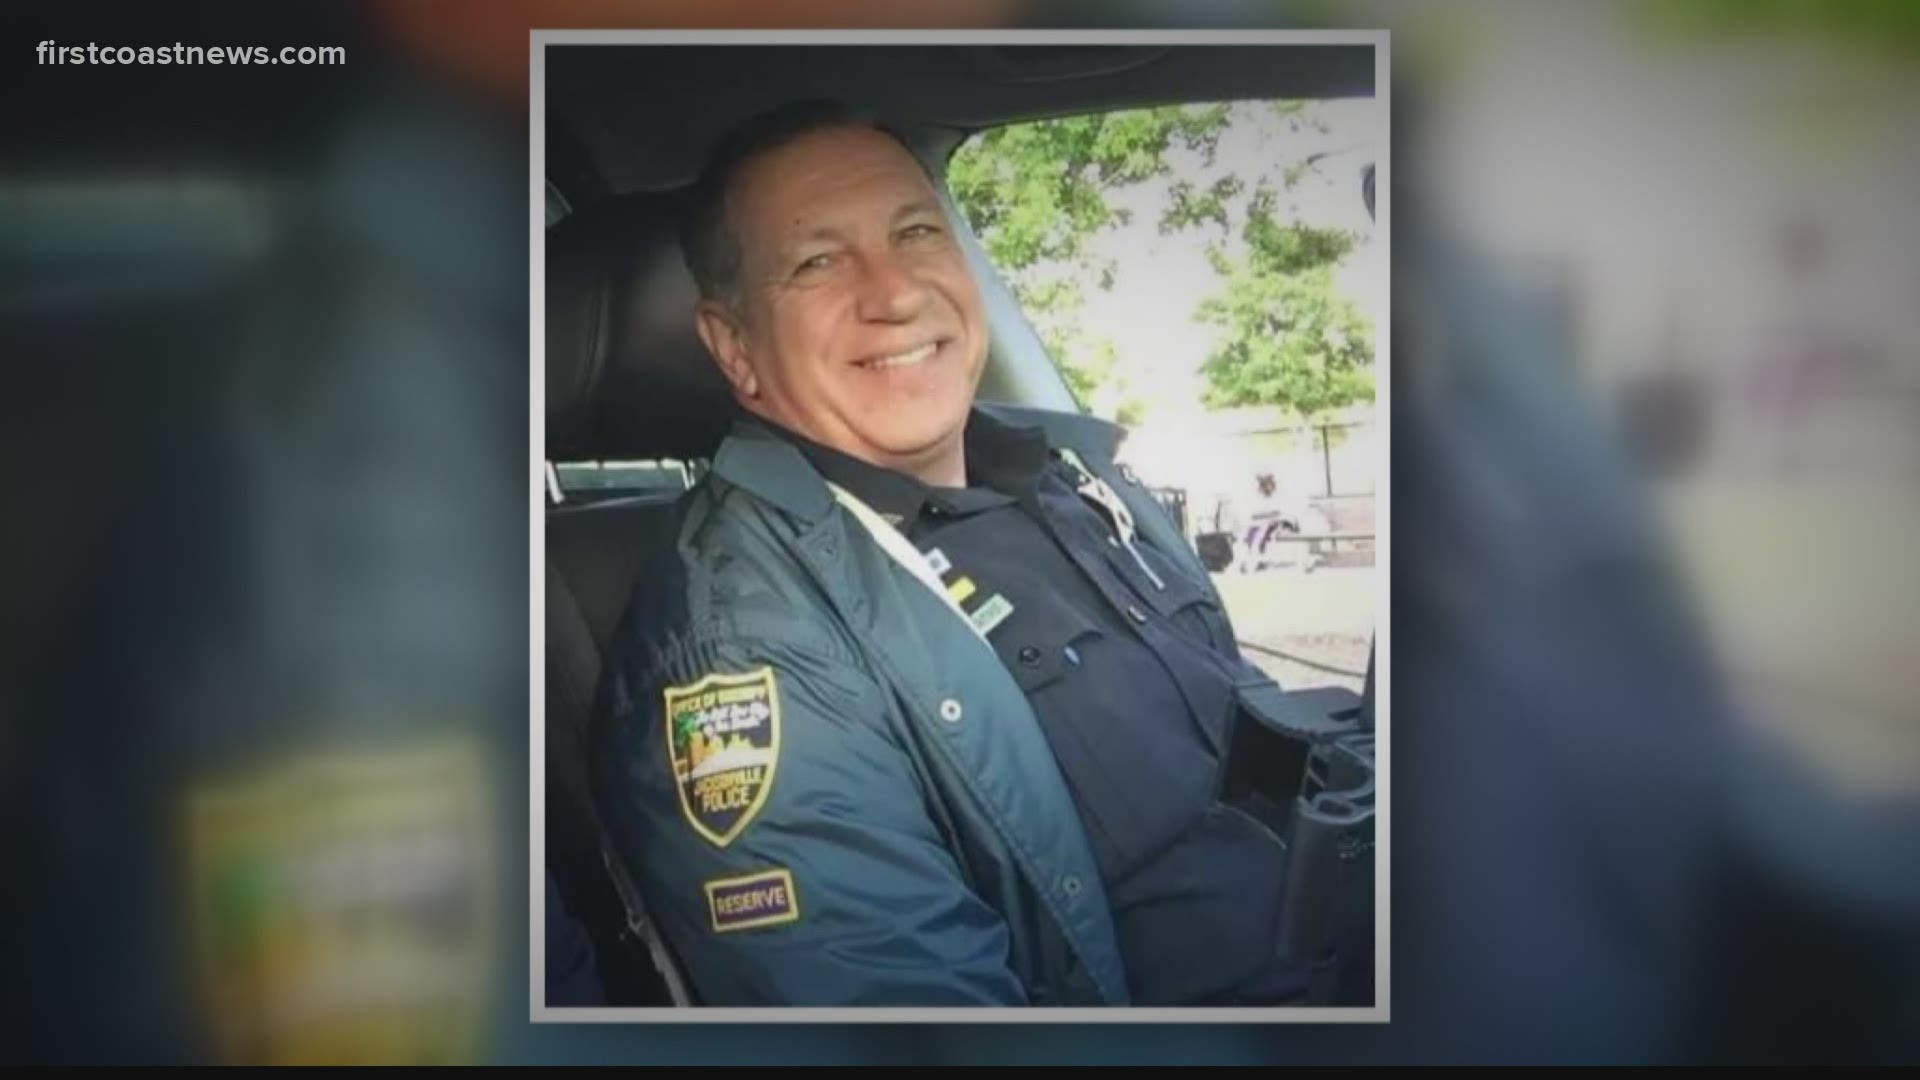 A volunteer Jacksonville Sheriff's Office auxiliary sergeant died Wednesday of COVID-19, according to a former JSO public information officer.